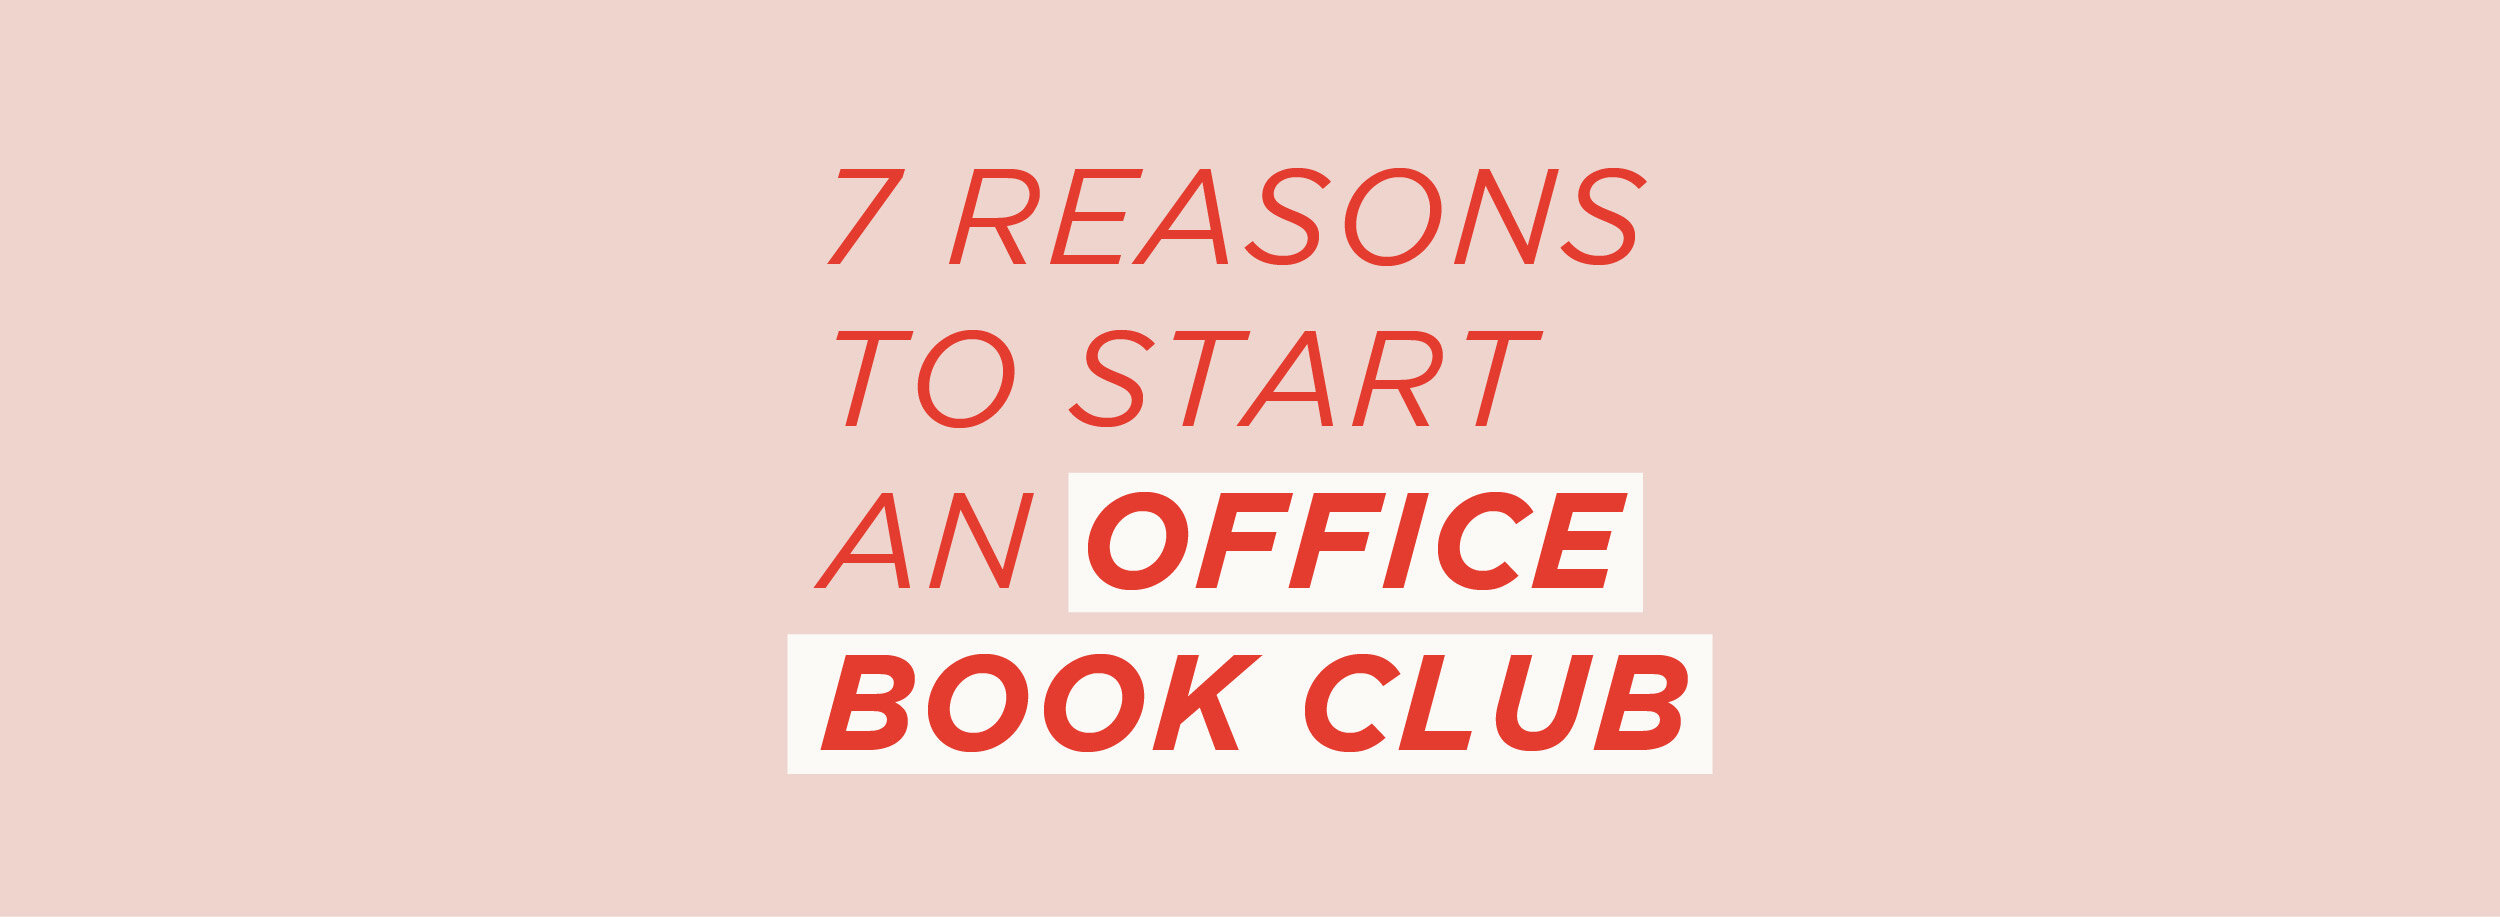 7 Reasons to Start an Office Book Club — Hoot Design Company | A Women-led,  Creative Branding Agency